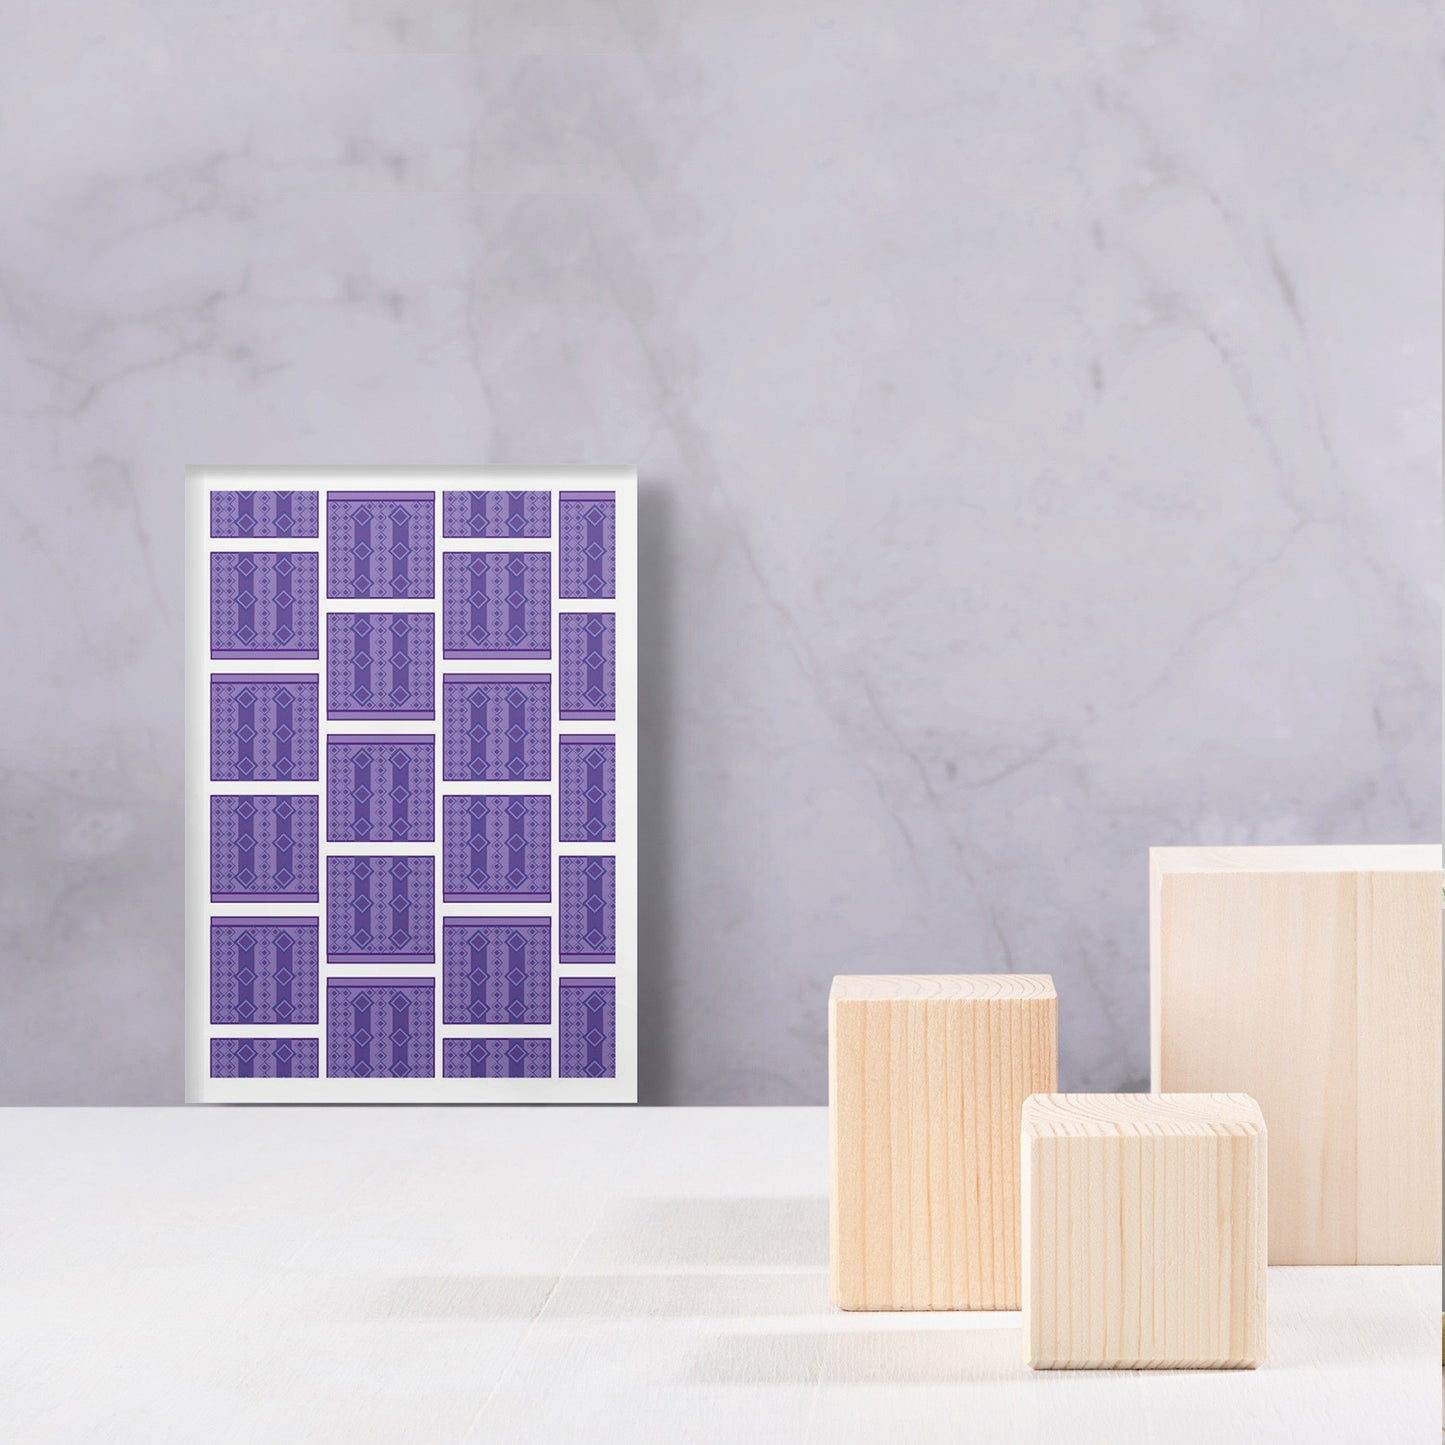 Striking Purple And White Art Canvas Wall Painting